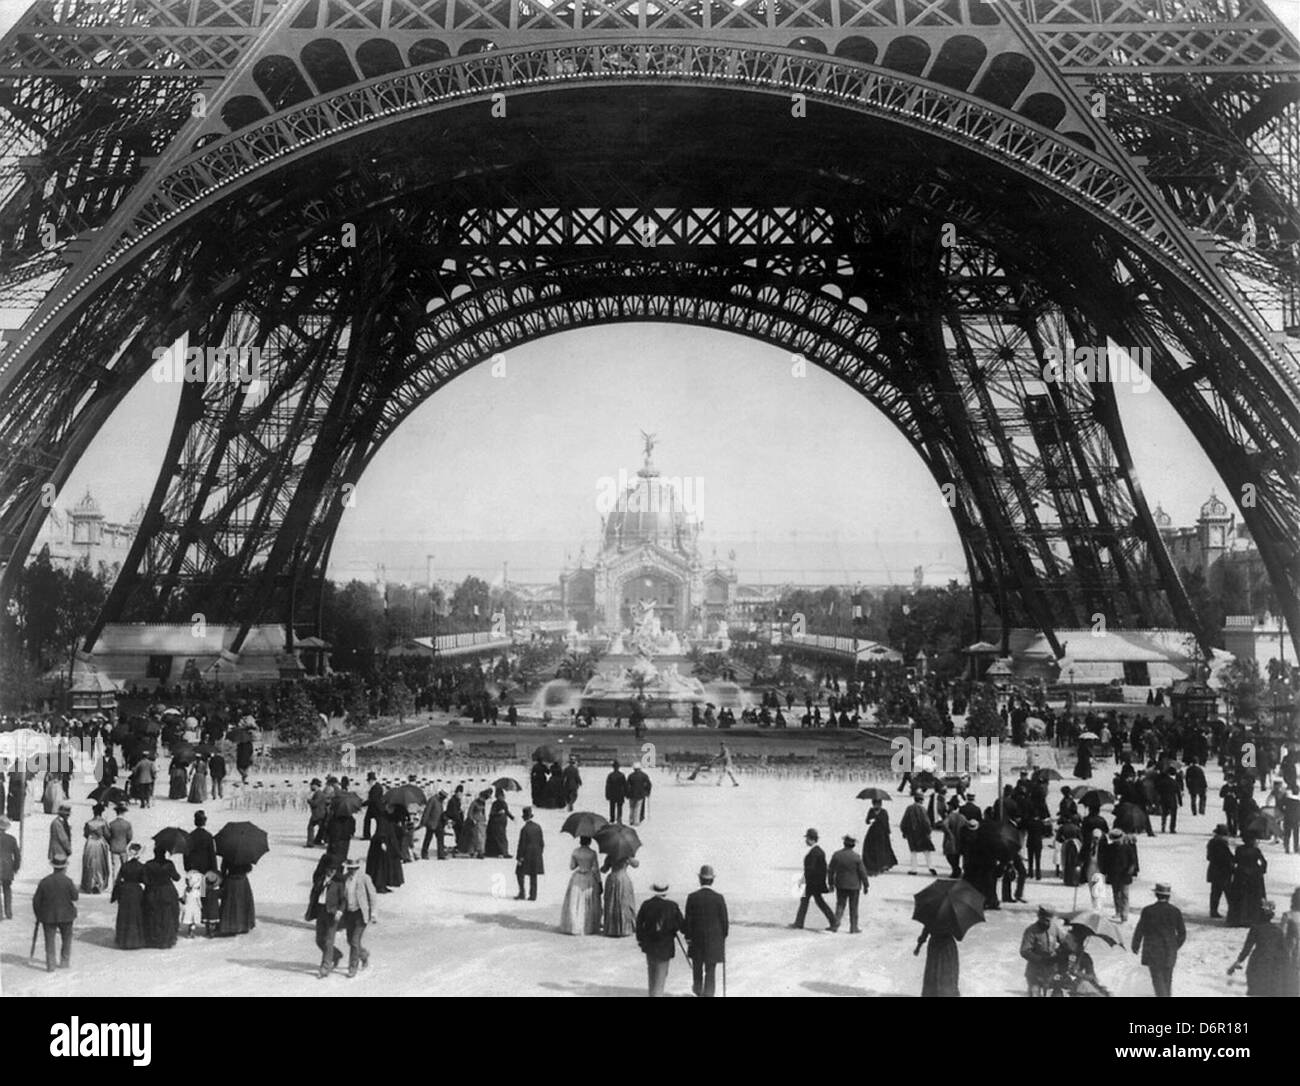 Paris Exposition, view from ground level of the Eiffel tower with Parisians promenading, 1889 Stock Photo